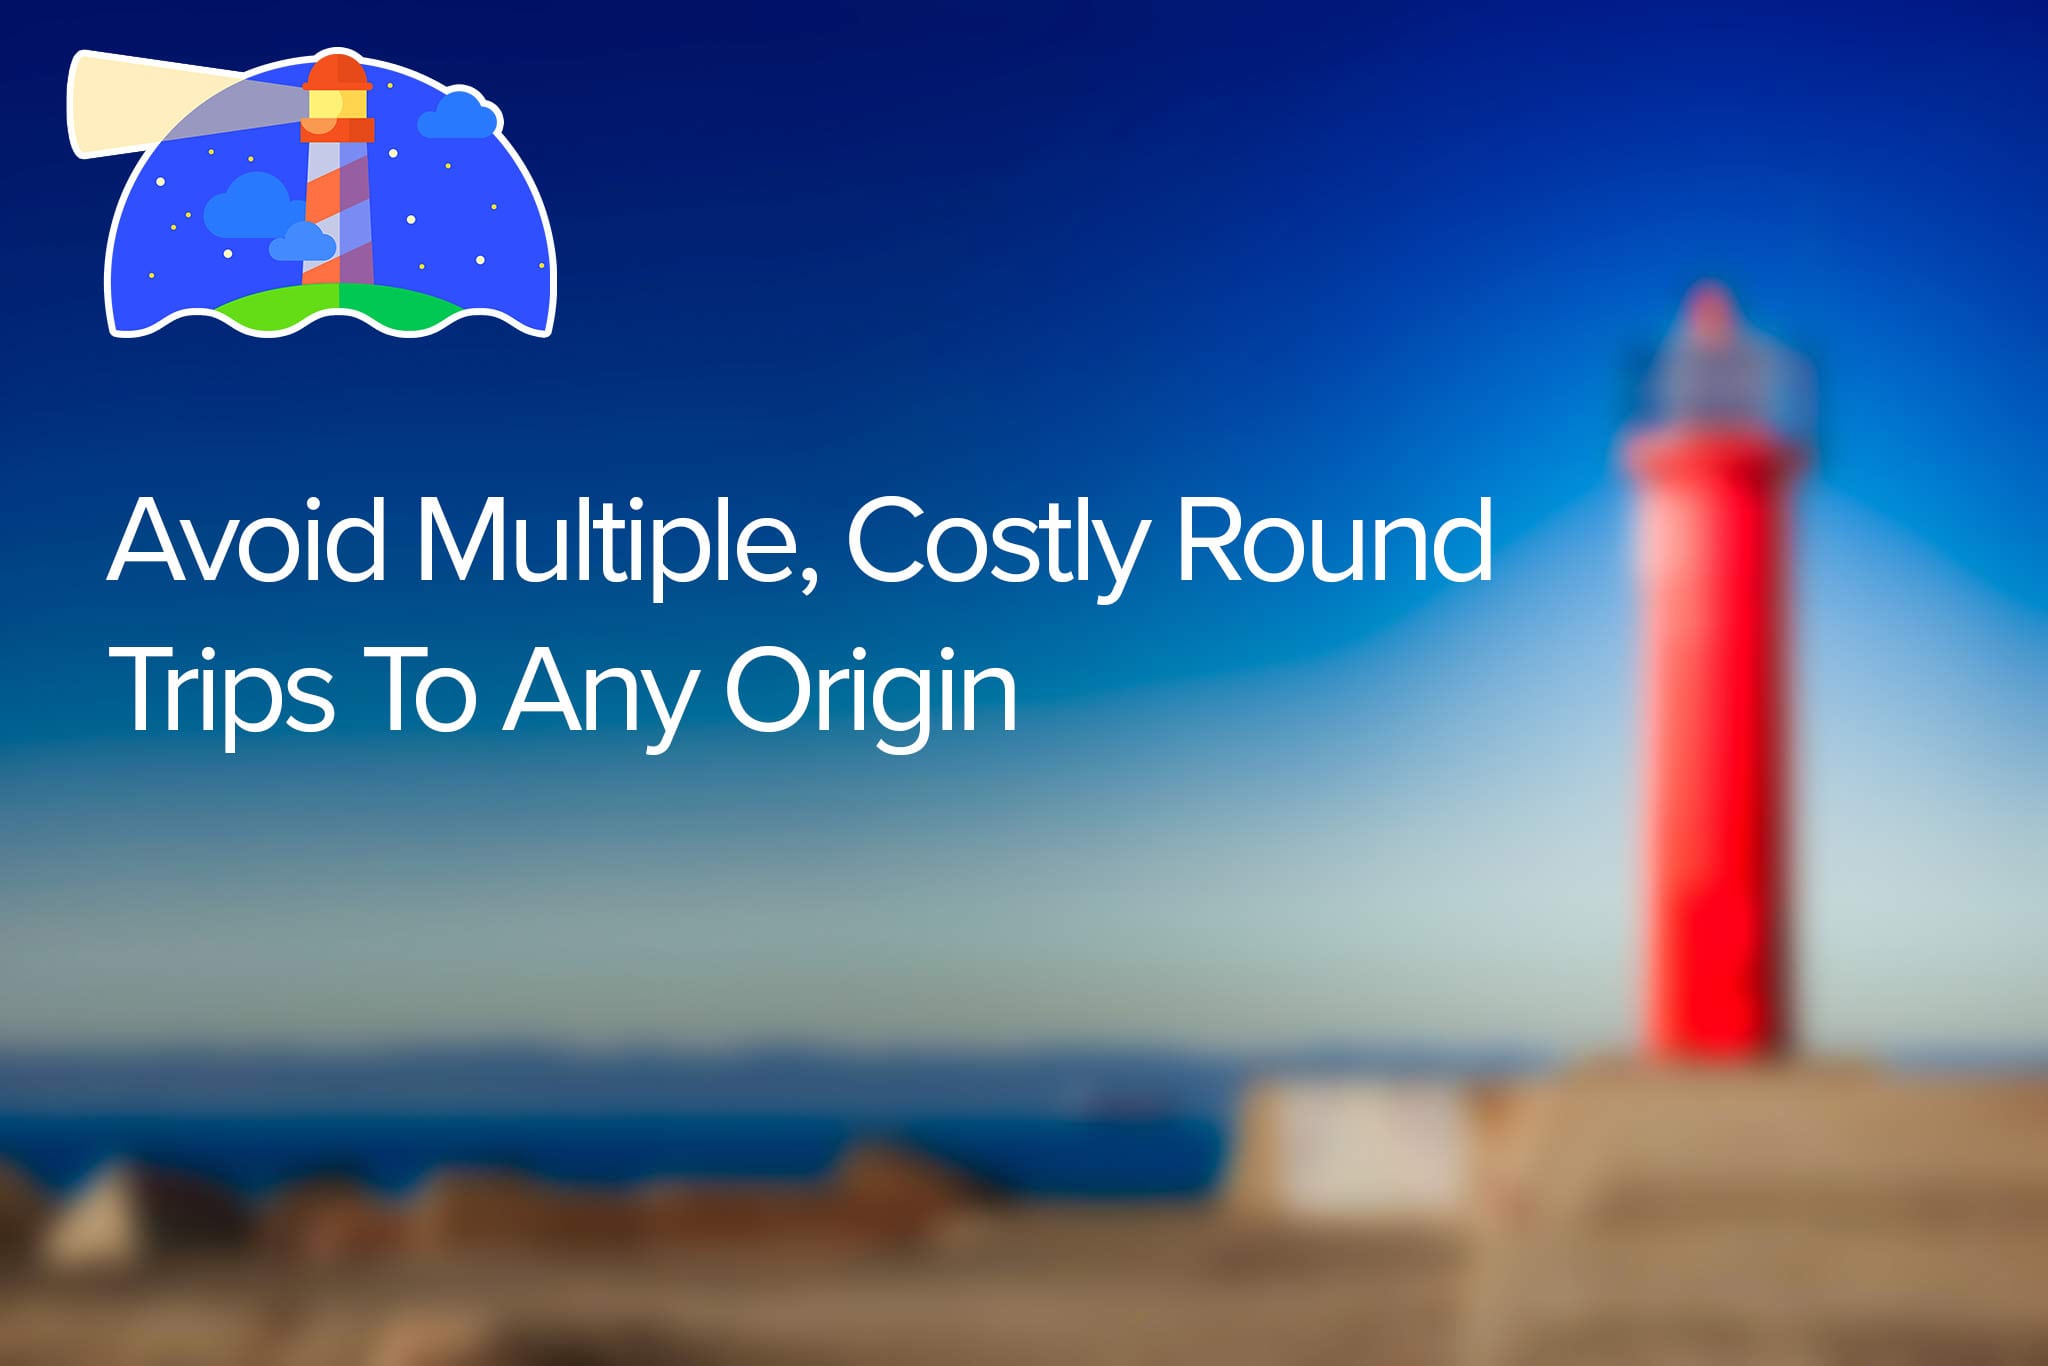 Avoid Multiple Costly Round Trips to Any Origin